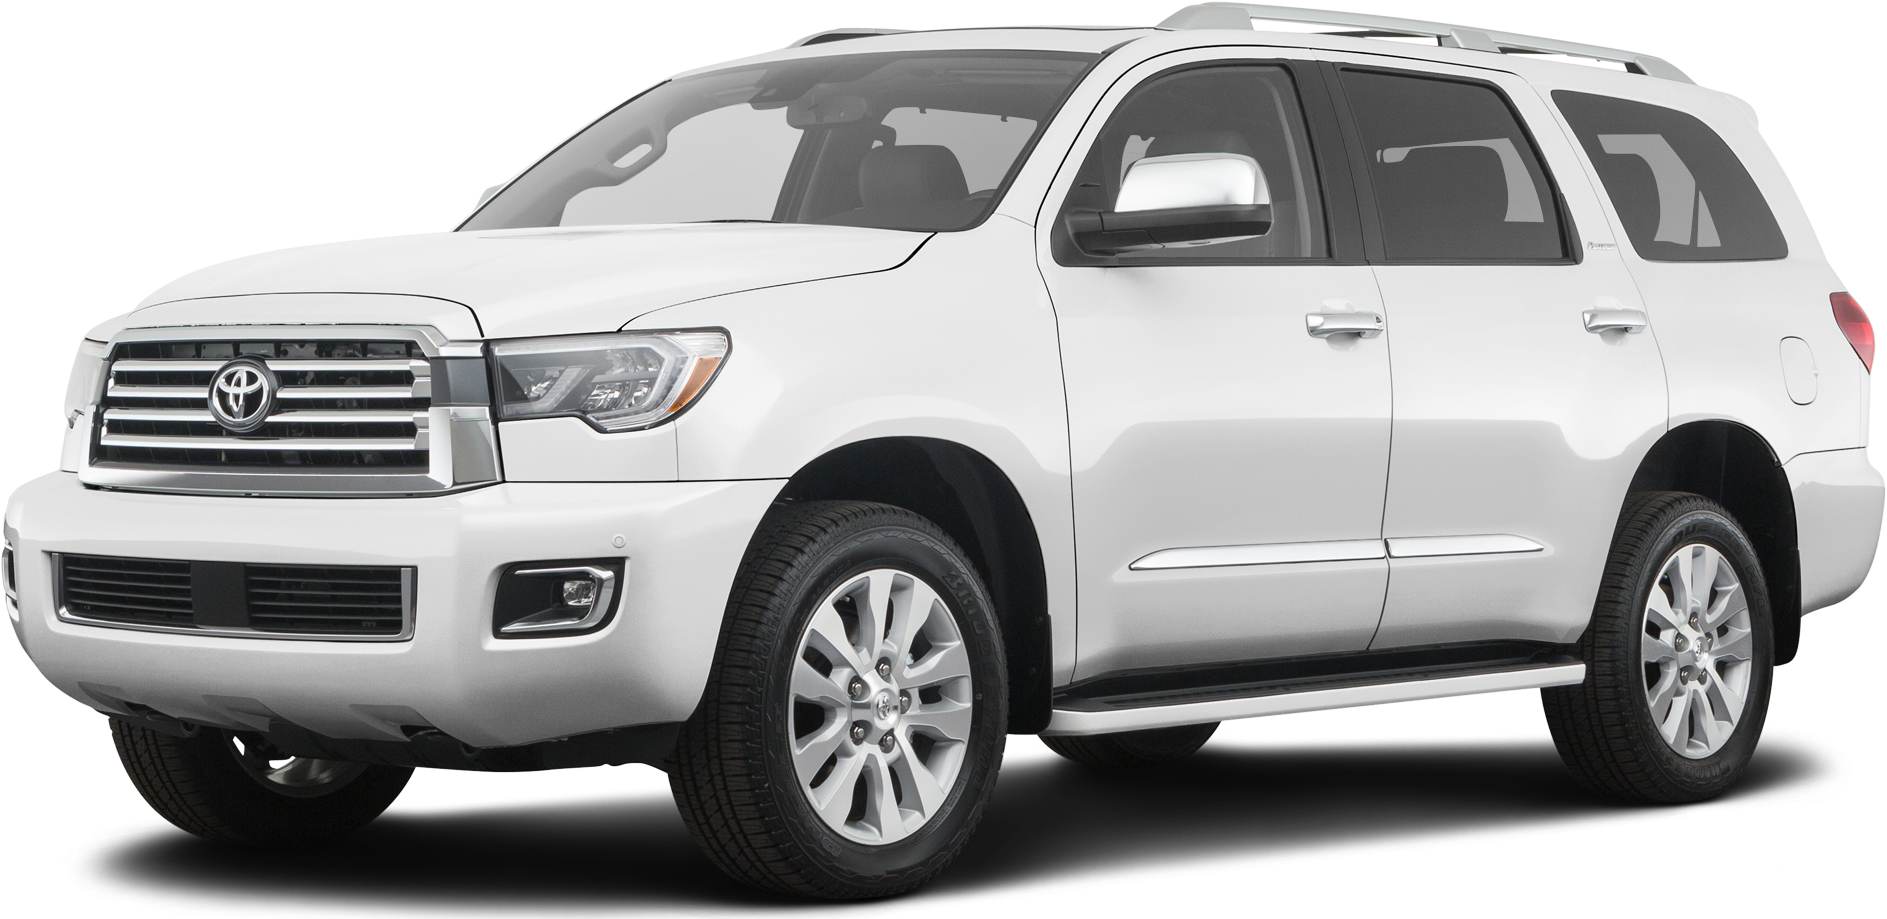 2019 Toyota Sequoia Price Value Ratings And Reviews Kelley Blue Book